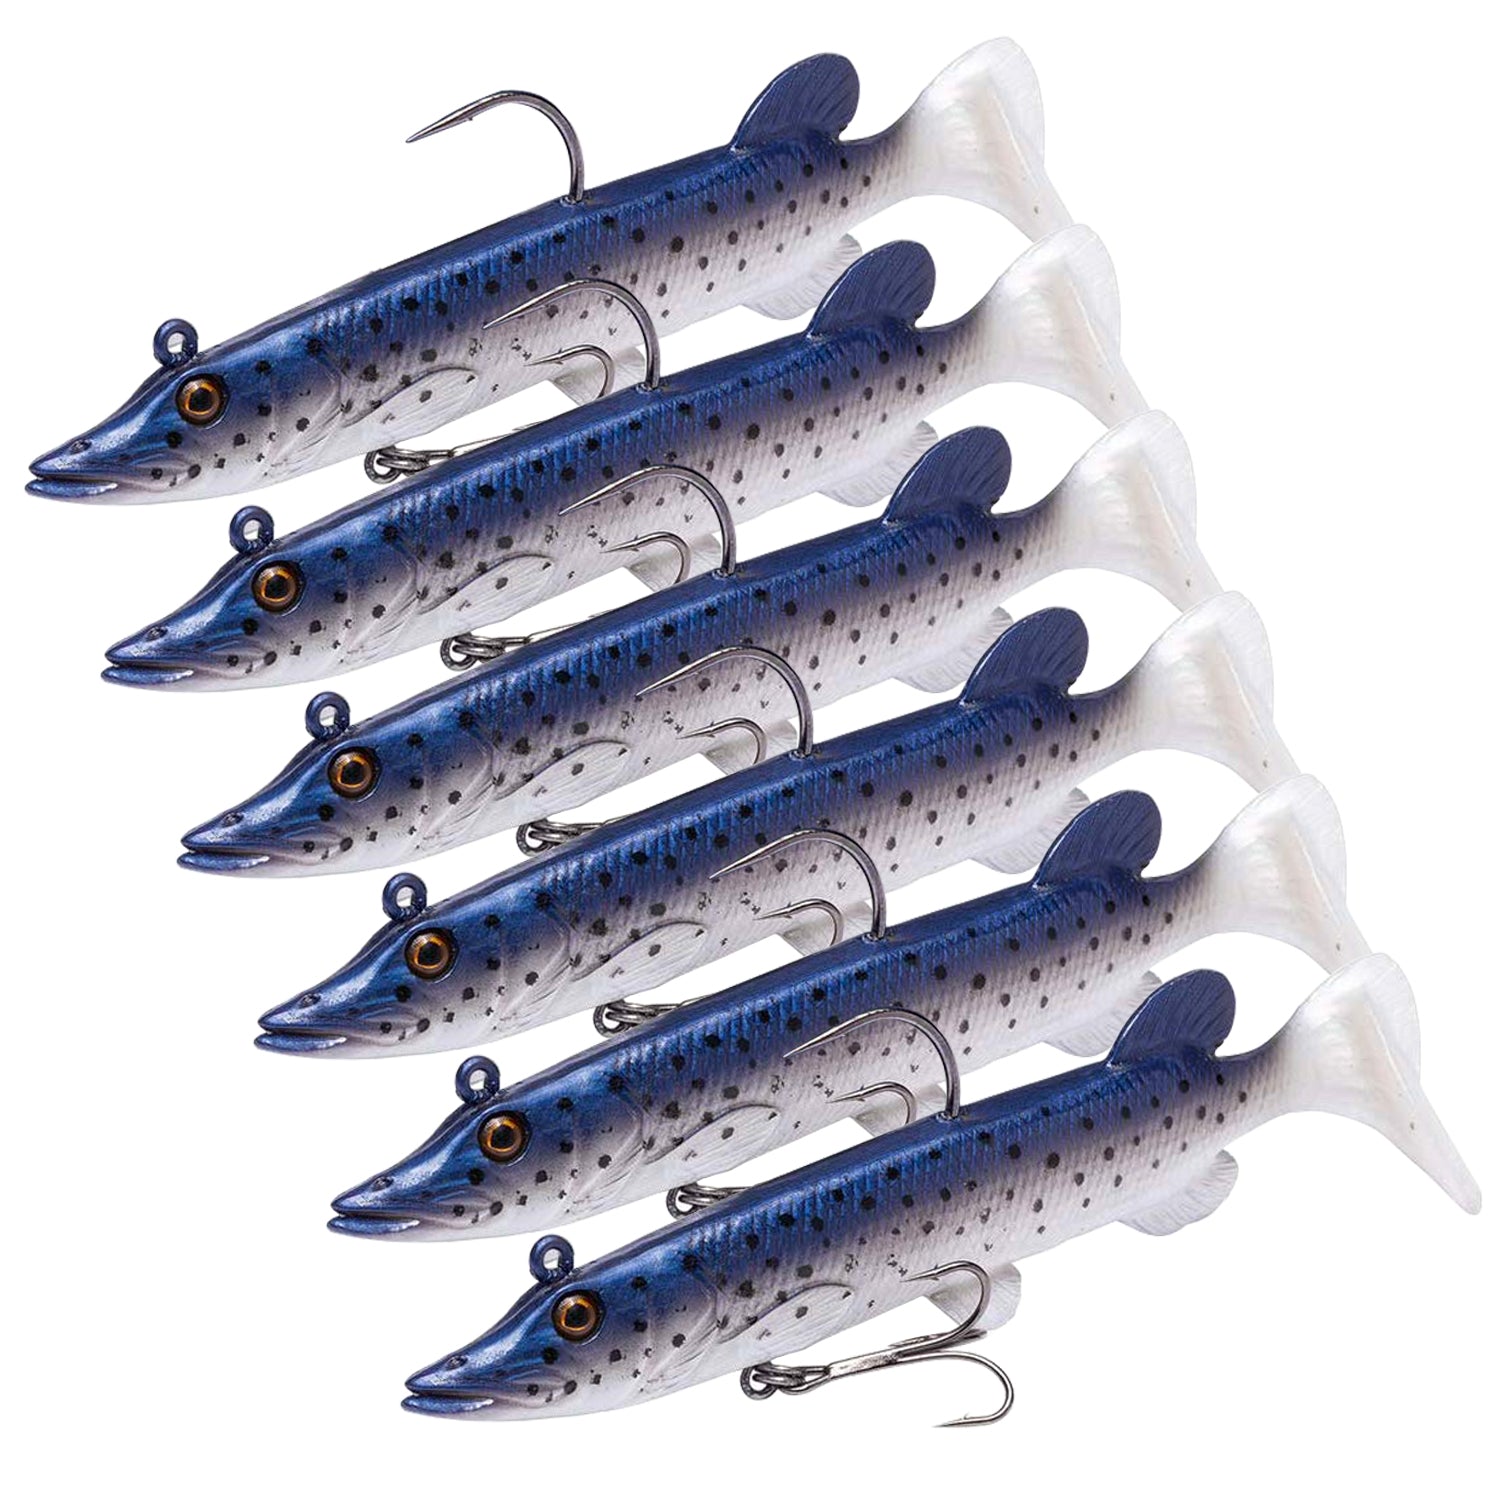 6-pack Resolv Soft Bait For Bass - 8cm Pin Tail Swimbait Silicone Lures